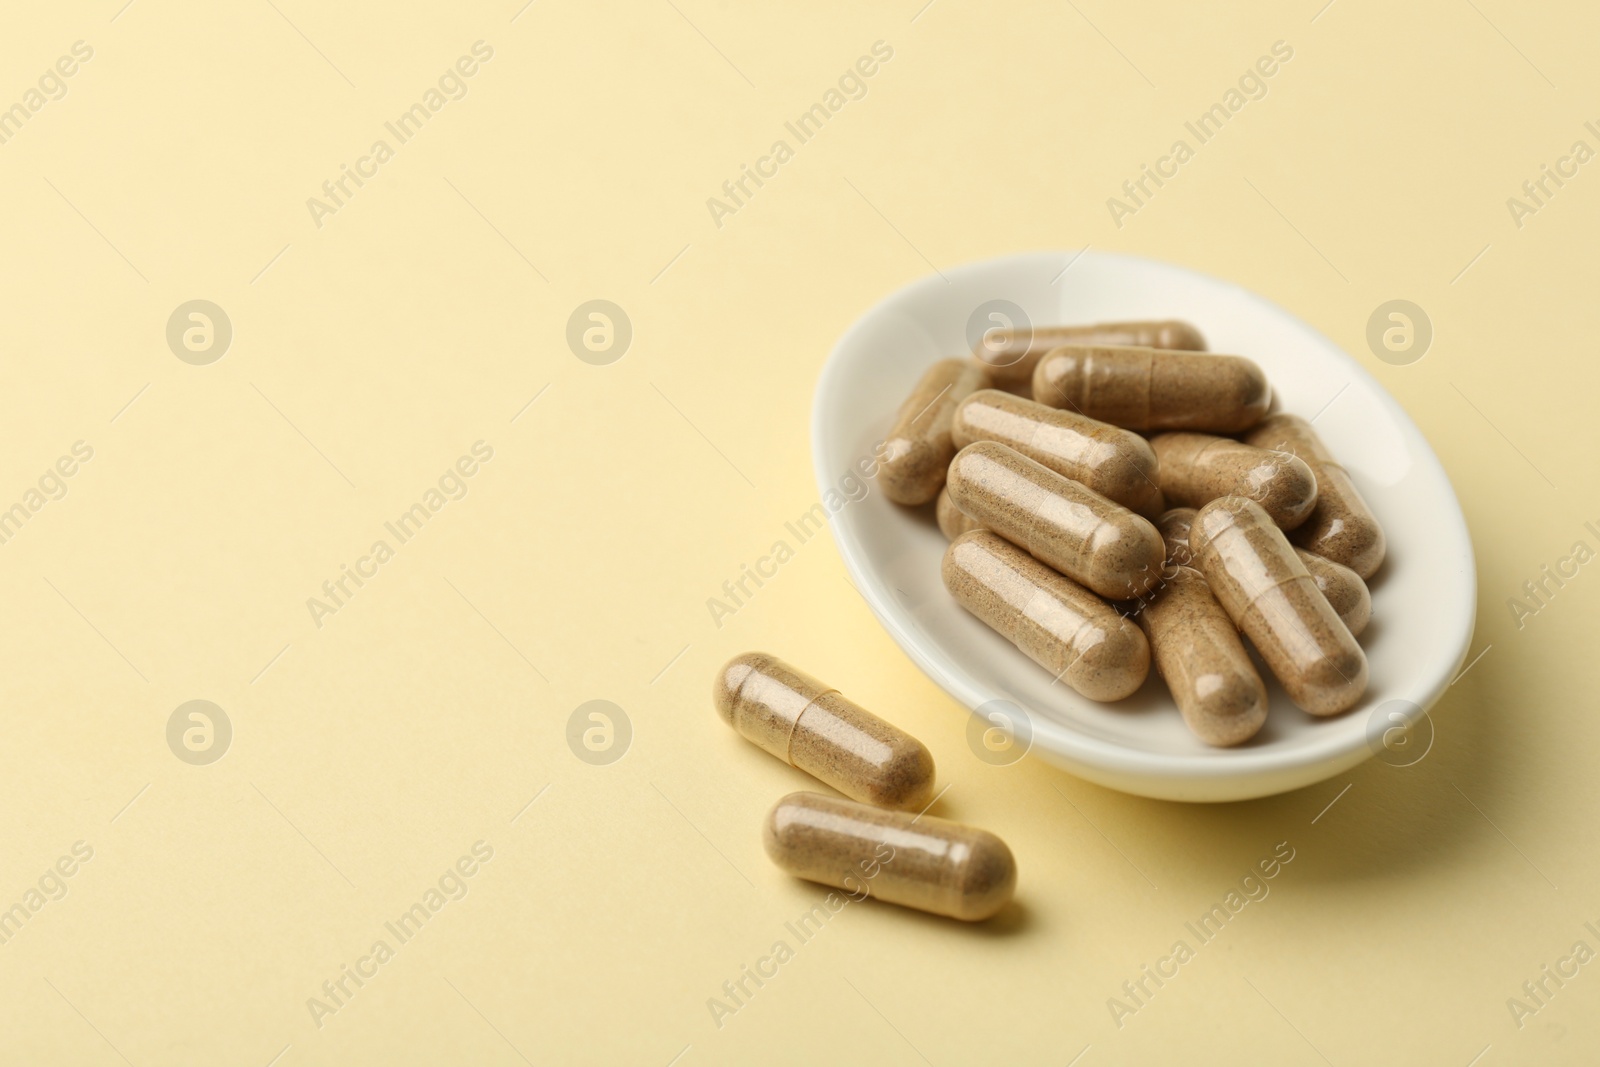 Photo of Vitamin capsules on pale yellow background, space for text